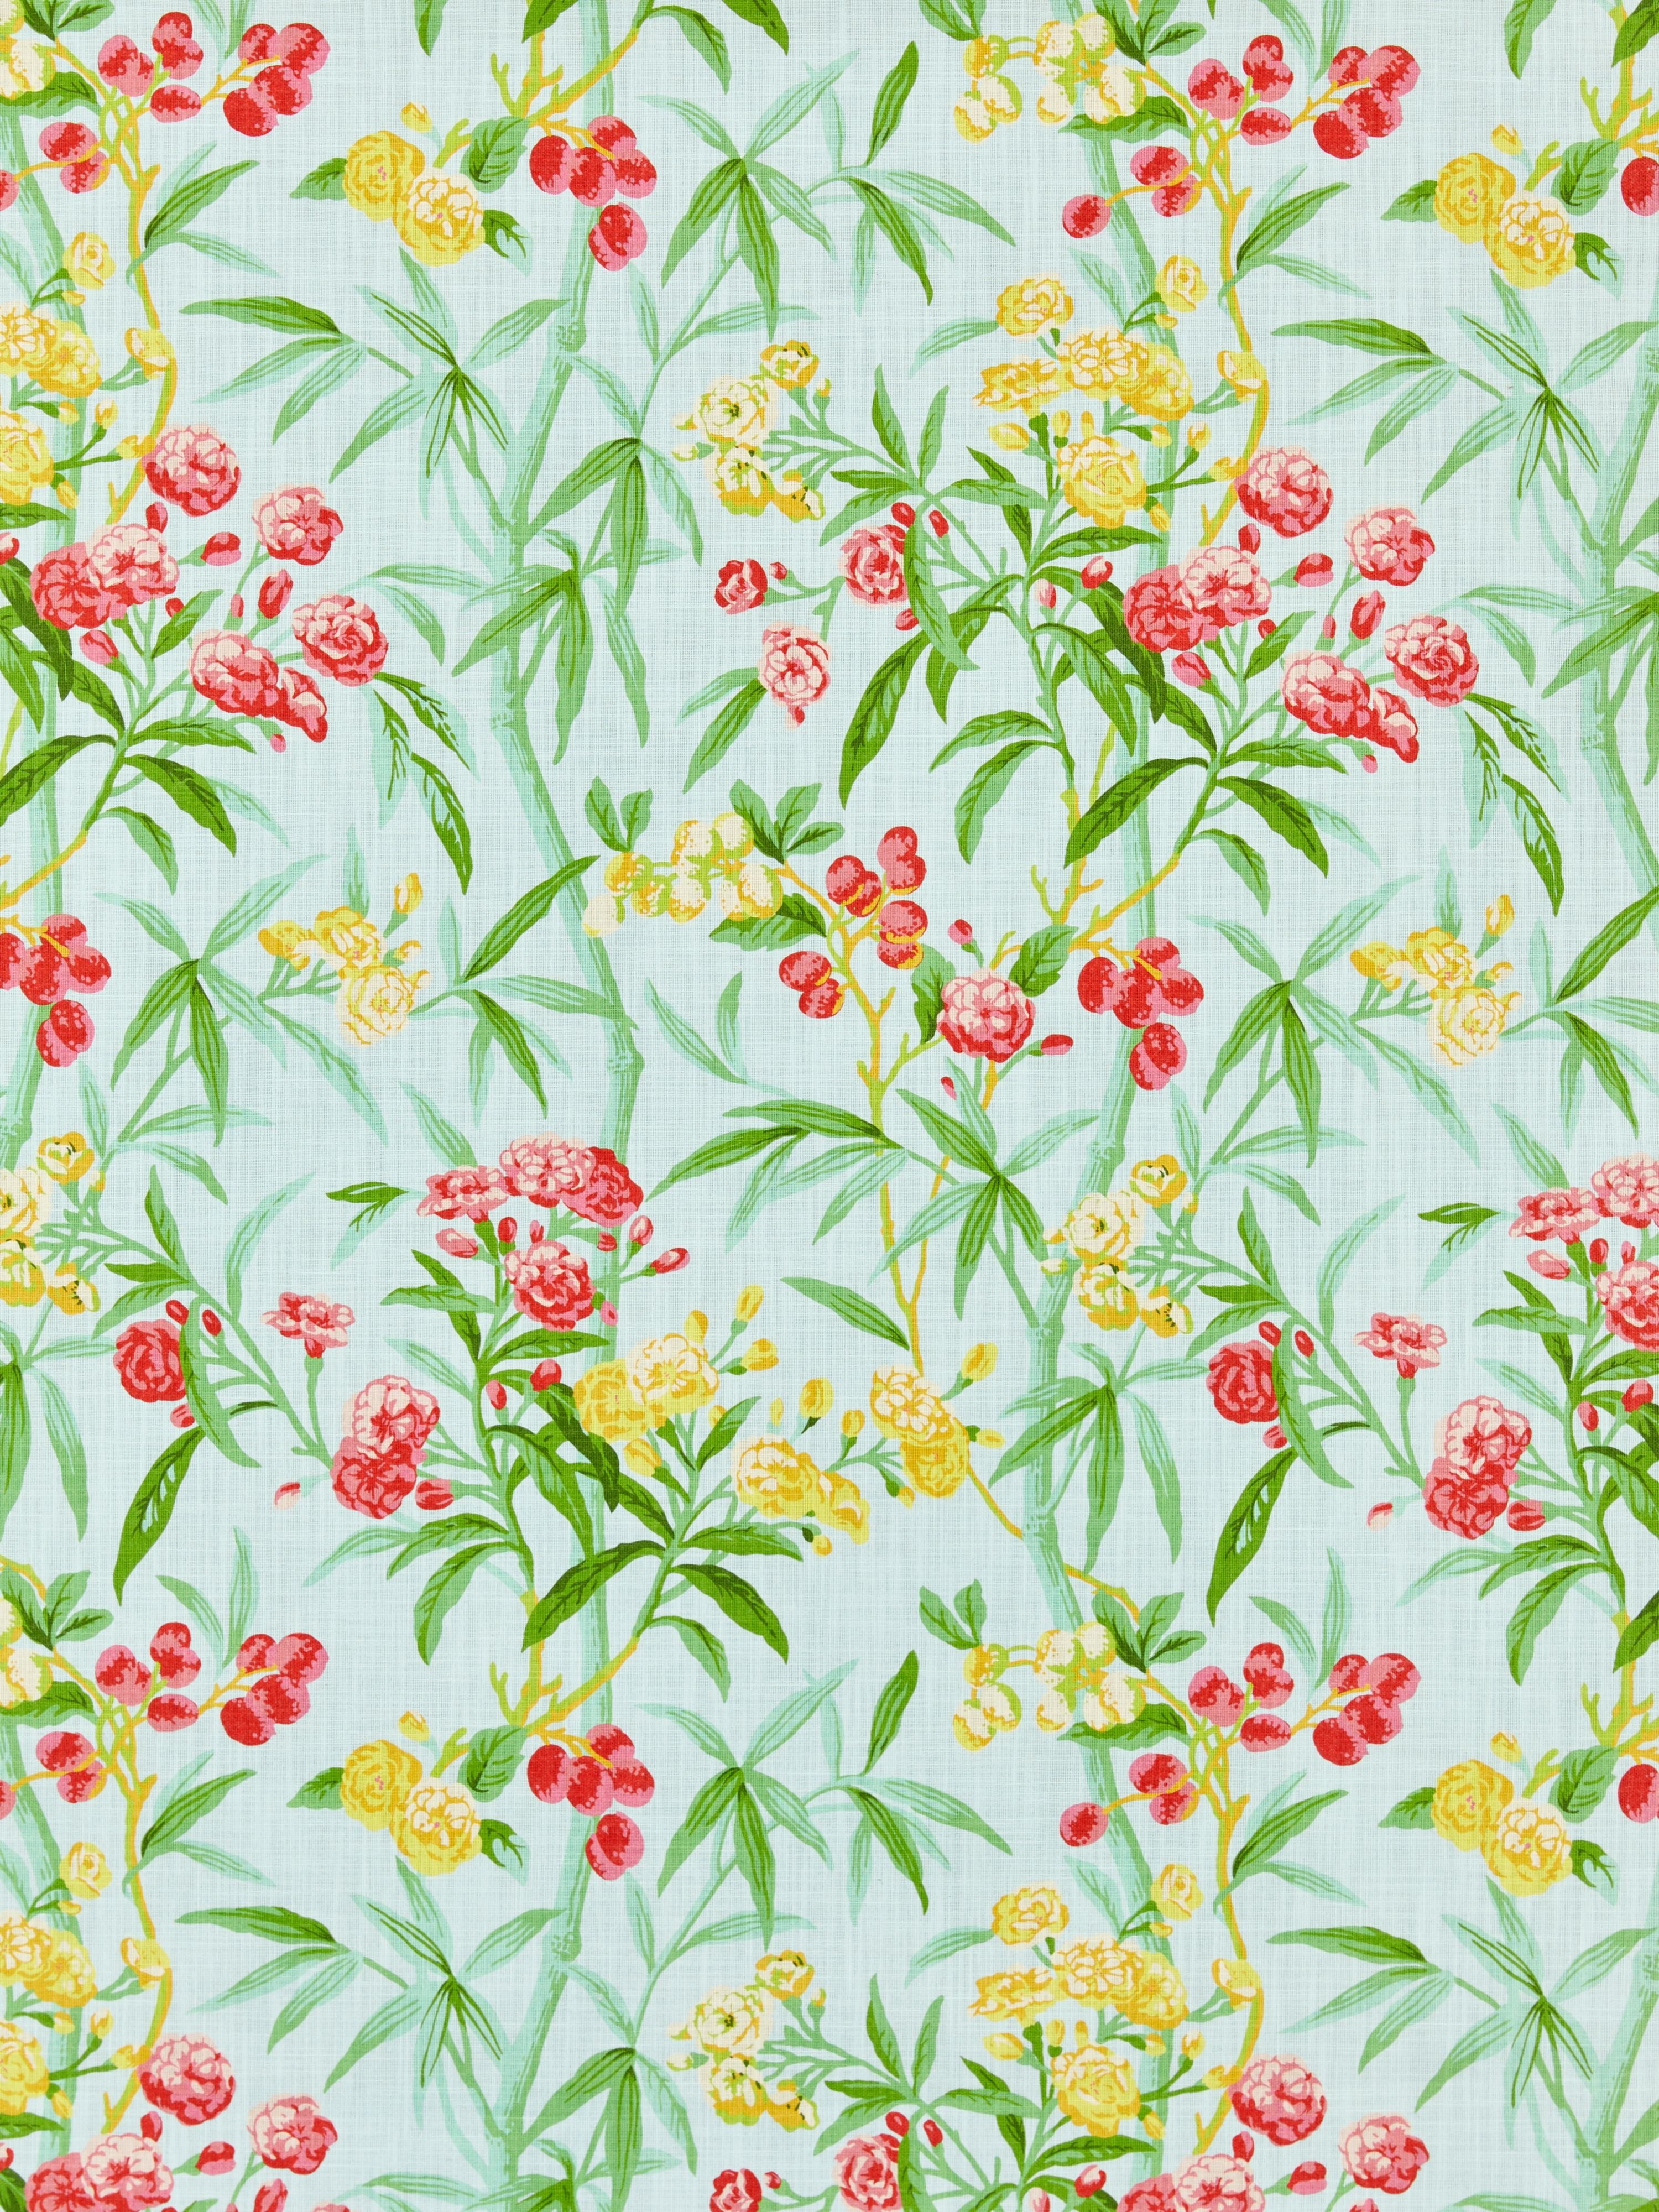 Lanai Outdoor fabric in passion fruit color - pattern number SC 000216638 - by Scalamandre in the Scalamandre Fabrics Book 1 collection